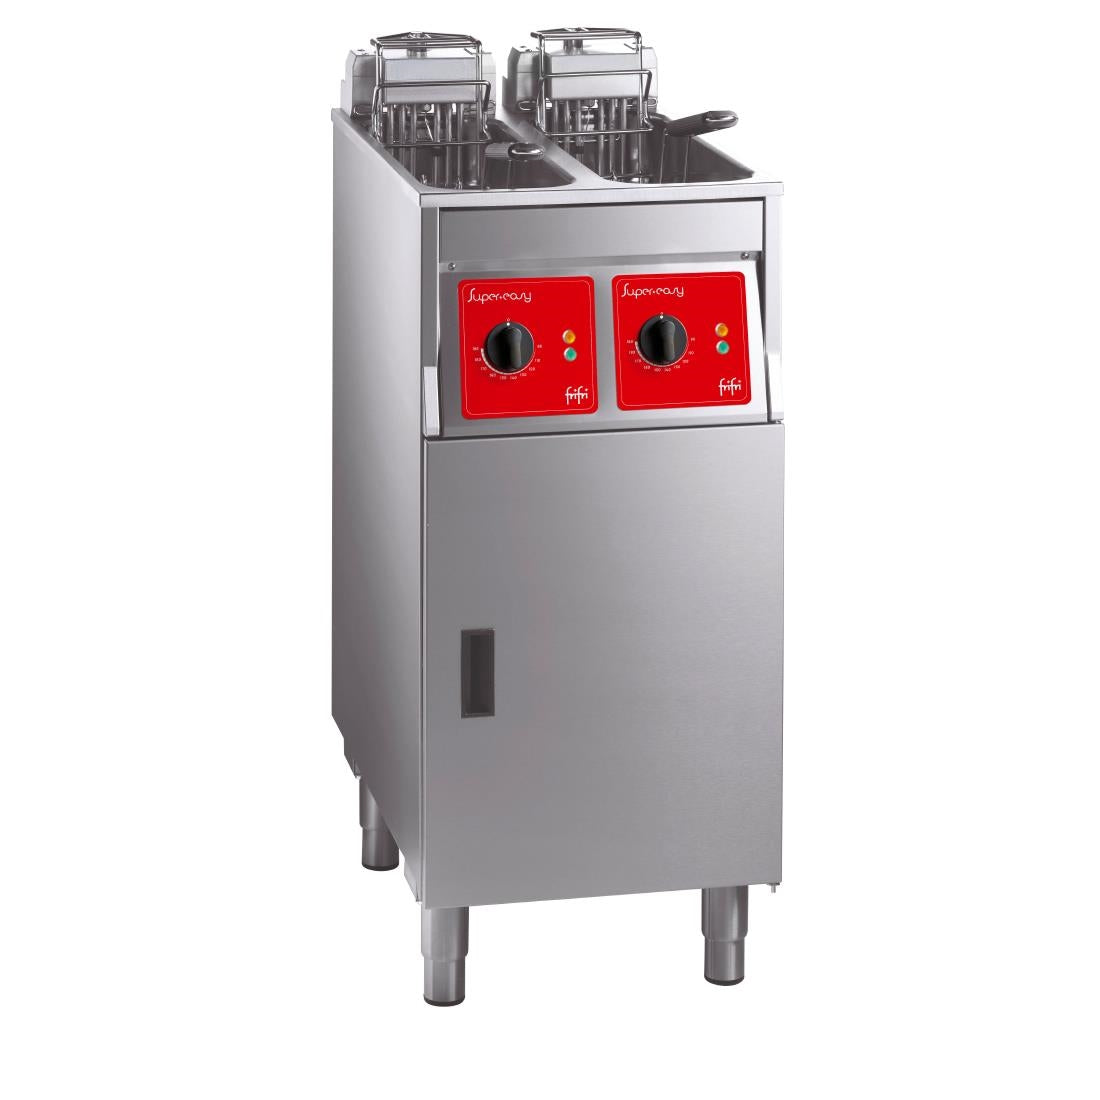 HS067-3PH FriFri Super Easy 422 Electric Free-Standing Twin Tank Fryer without Filtration 2 Baskets 2x 11kW - Three Phase